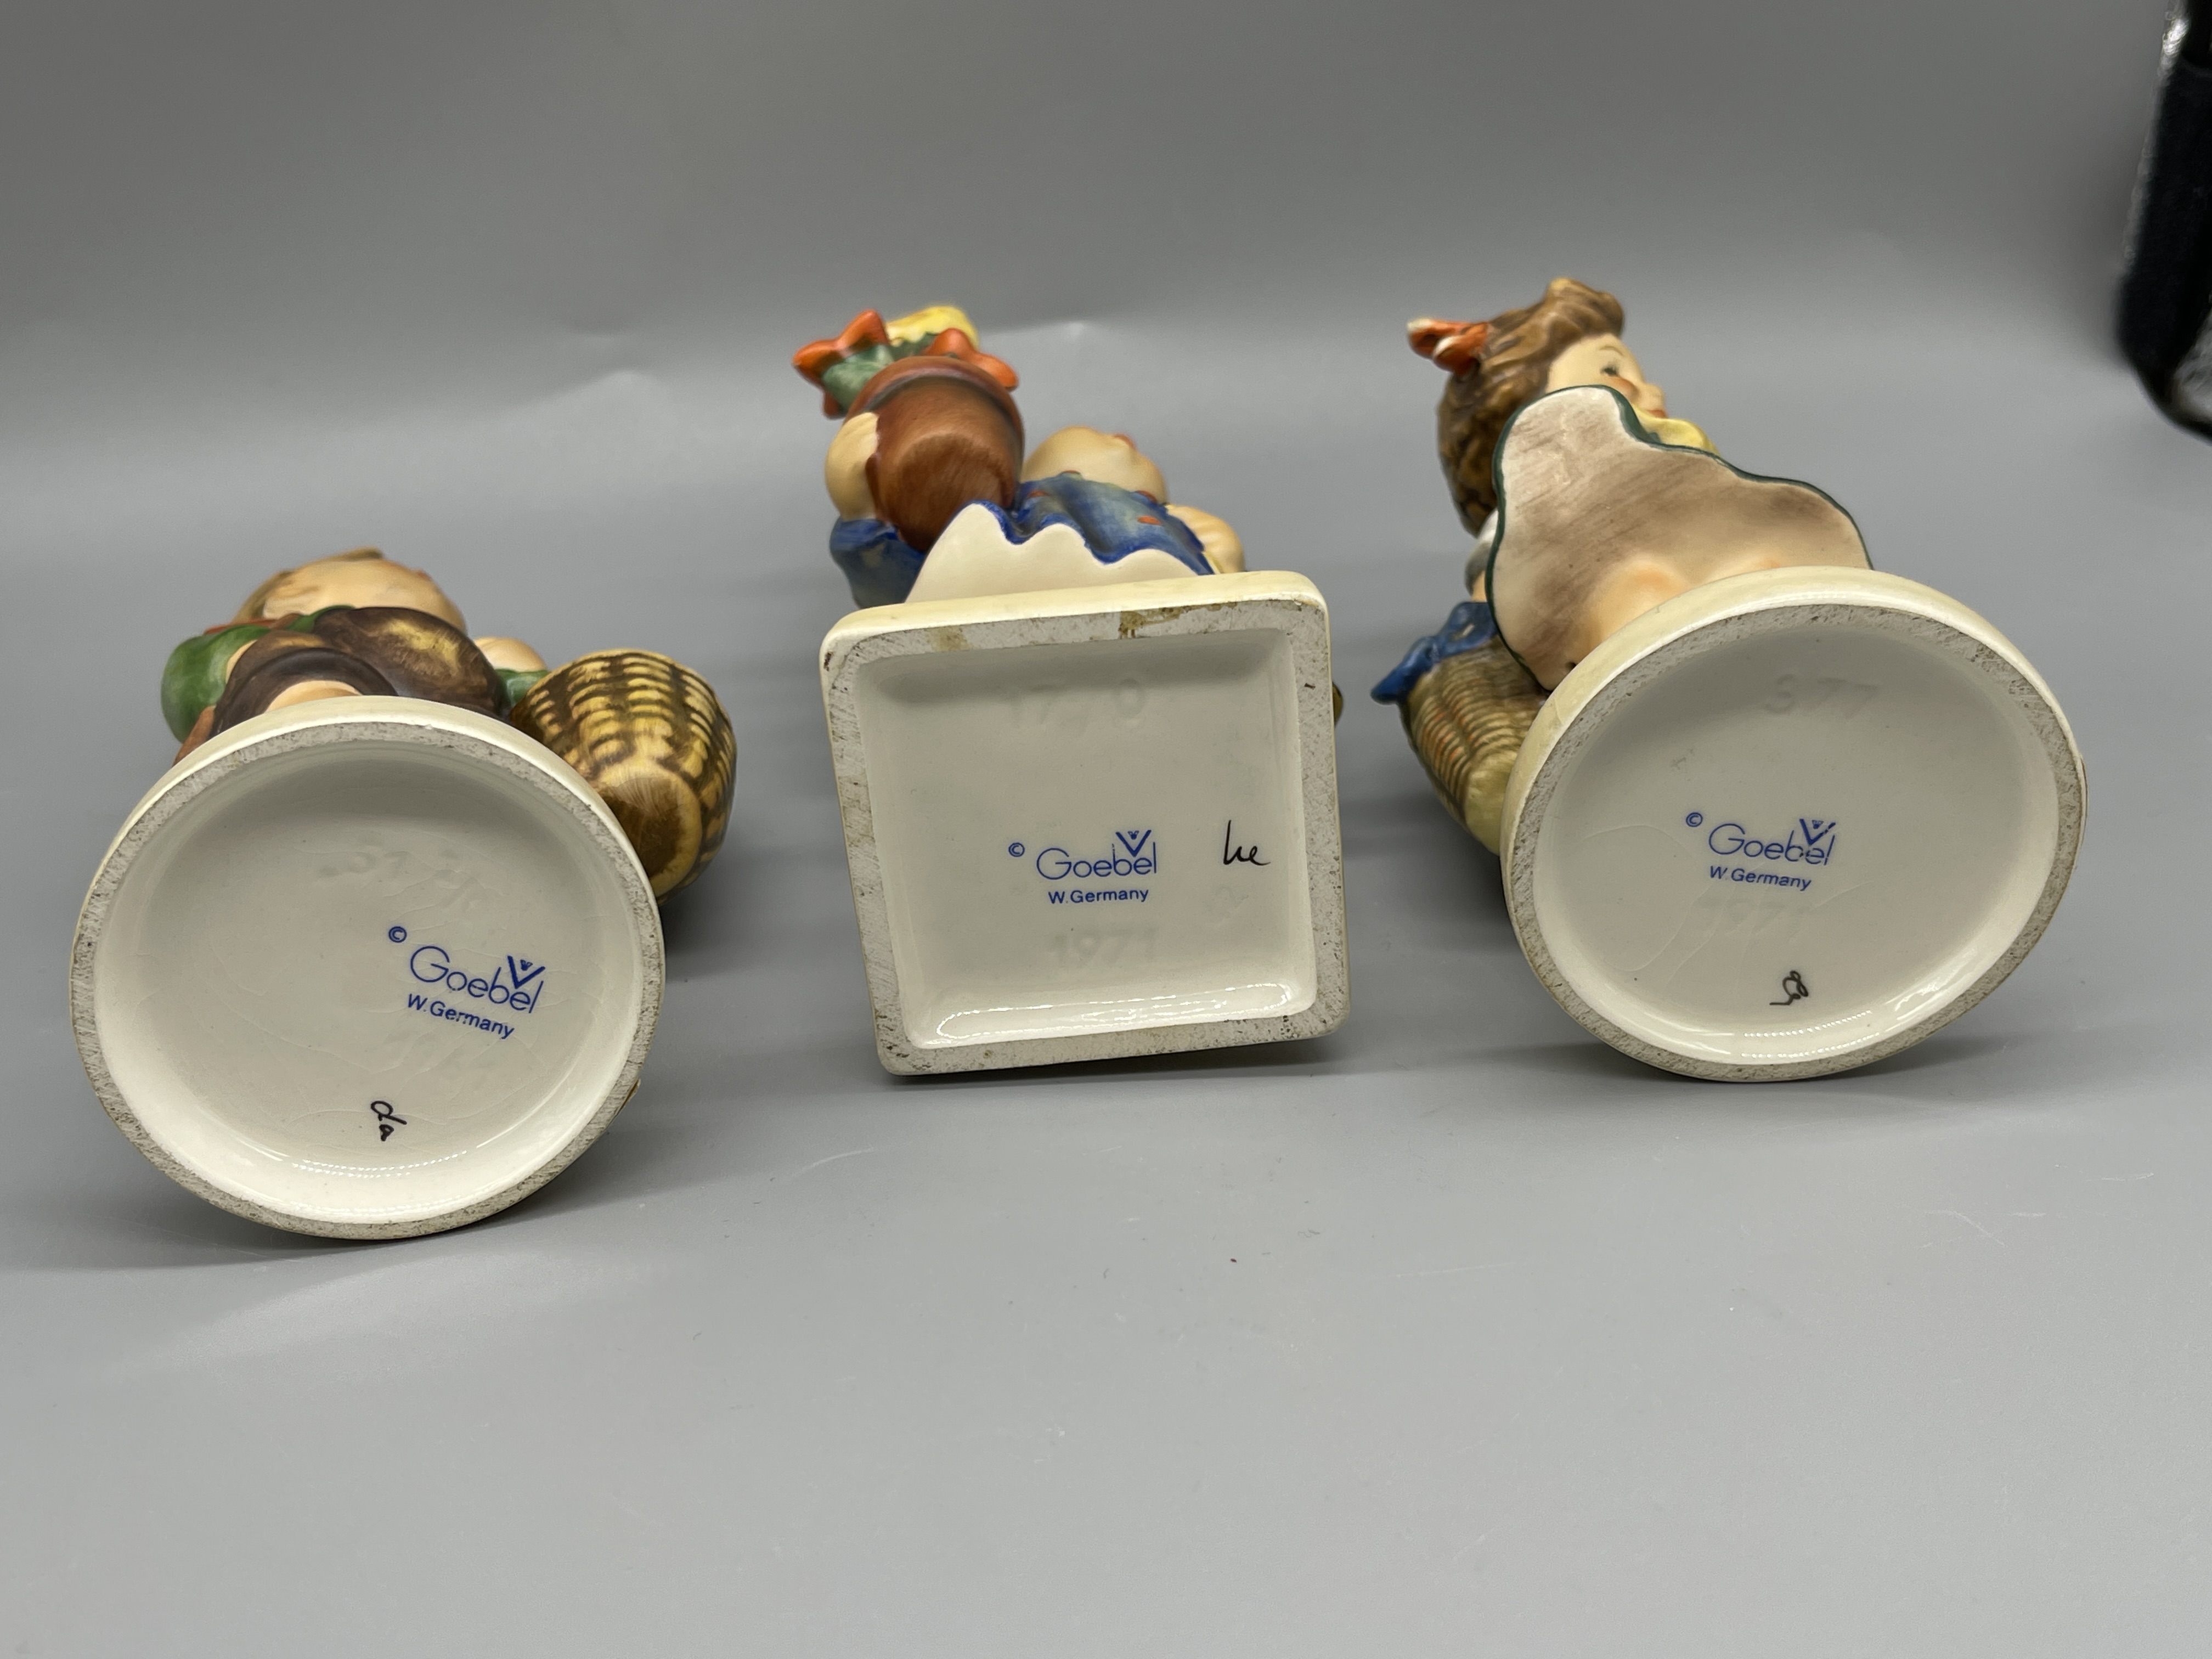 Two Nao figurines and three hummel figurines. - Image 12 of 12